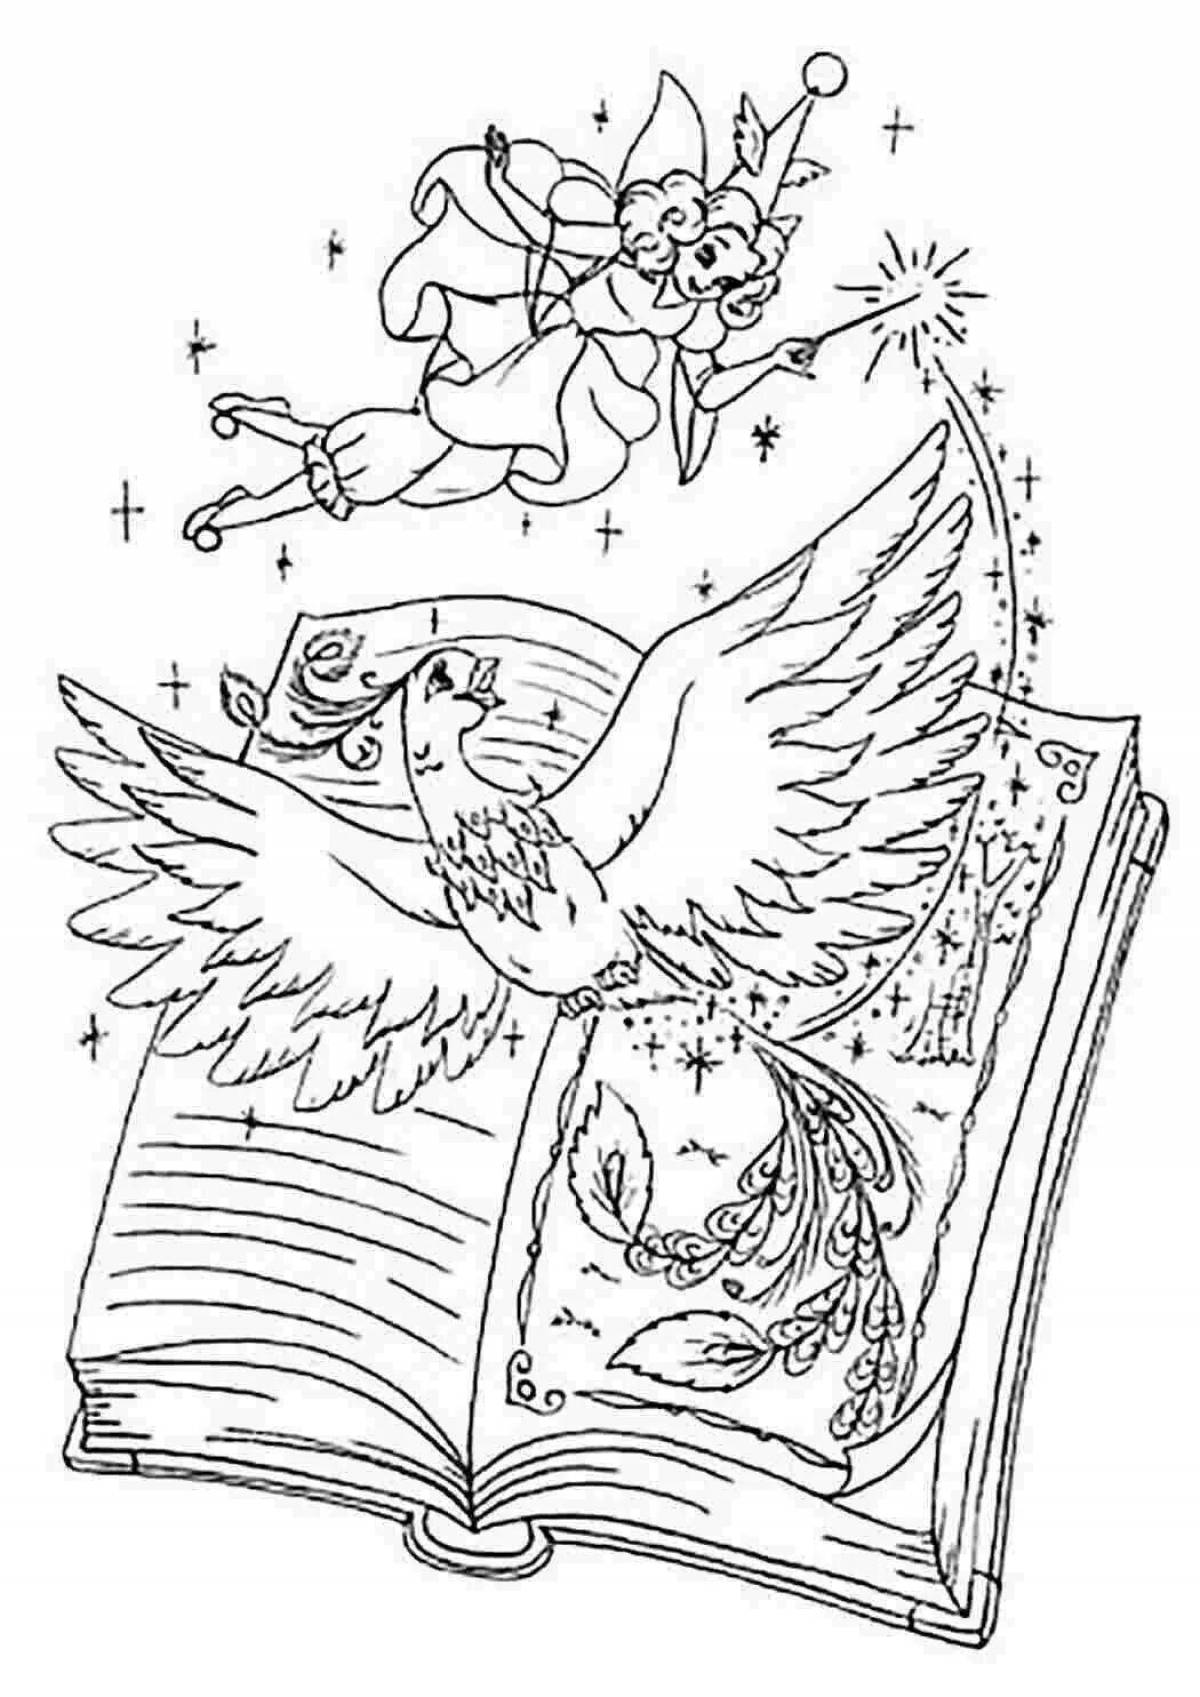 Coloring book dazzling Ivan Tsarevich and the Firebird